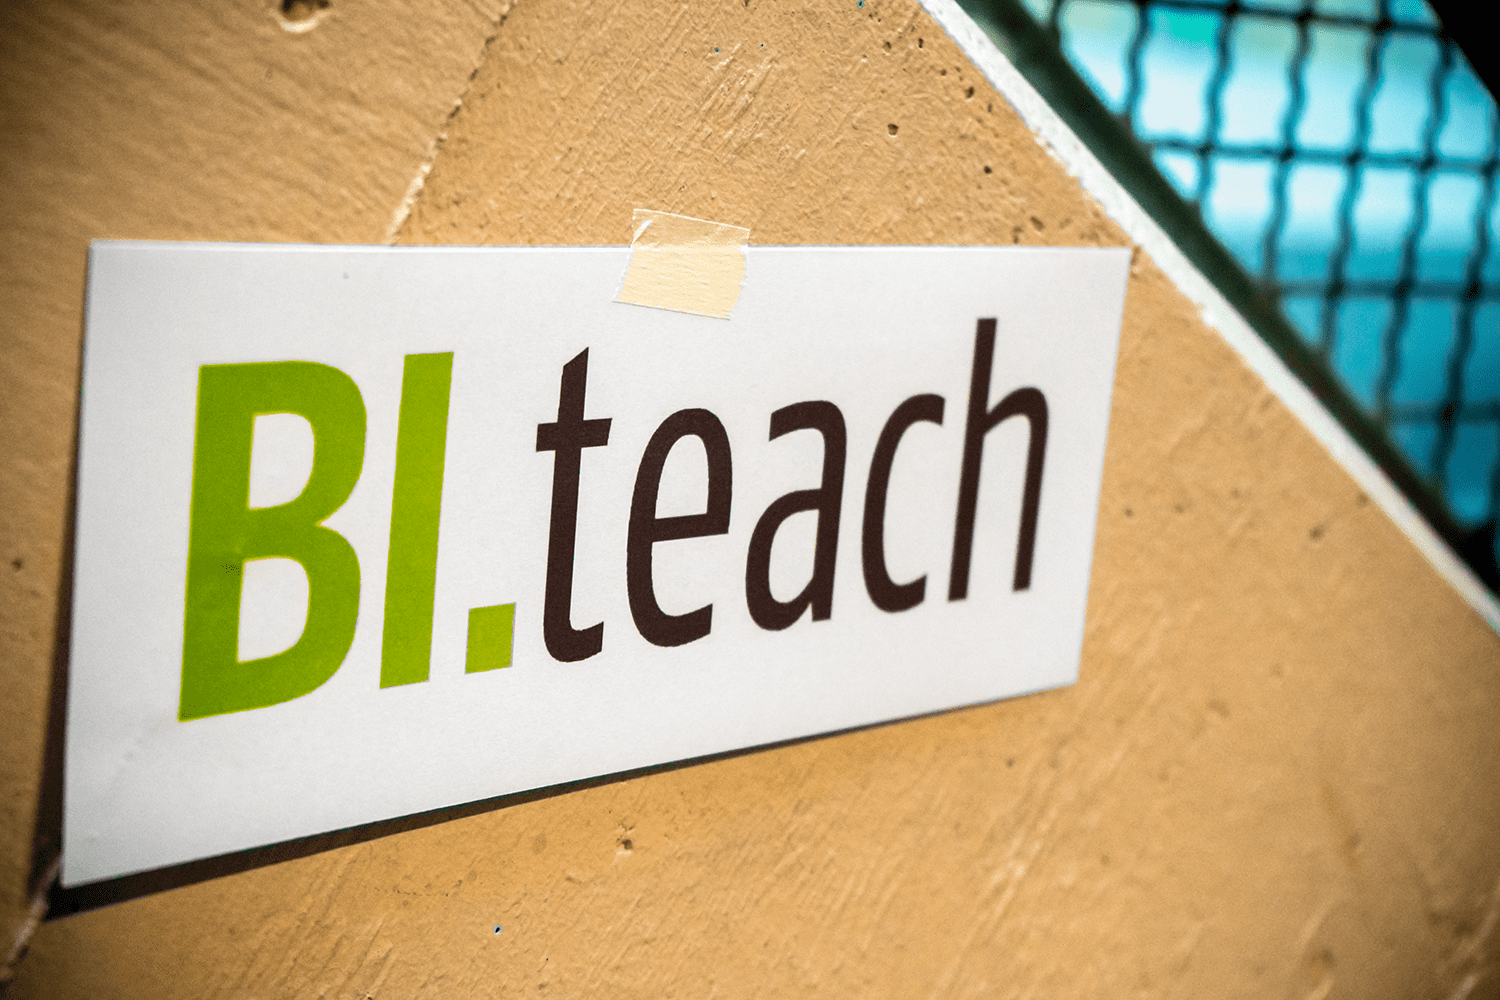 Picture of the logo for "BI.teach"